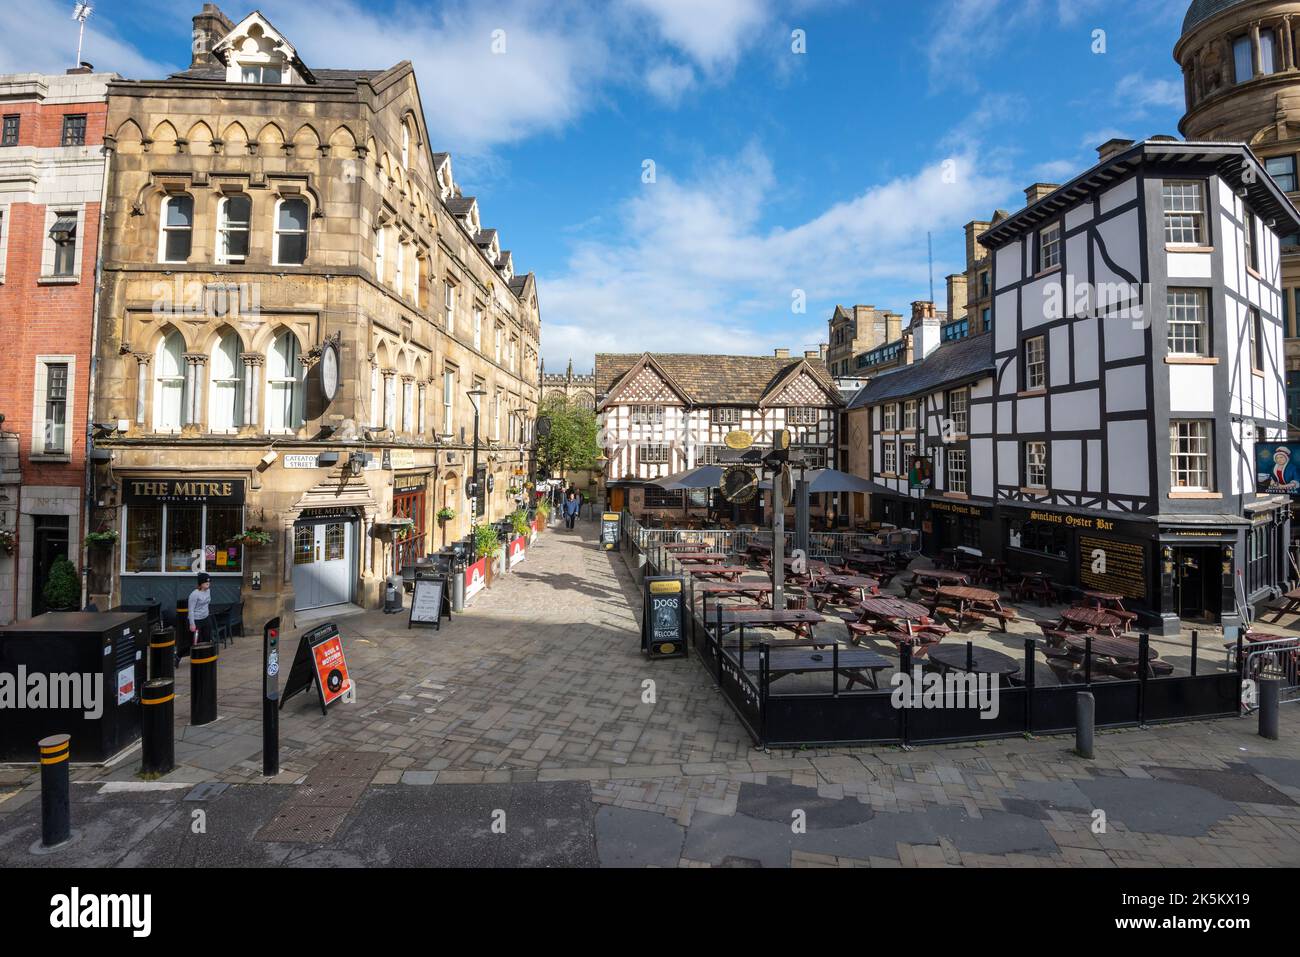 Shambles Square with the Mitre hotel, Old Wellington pub and Sinclairs Oyster bar, Manchester city centre, England. Stock Photo